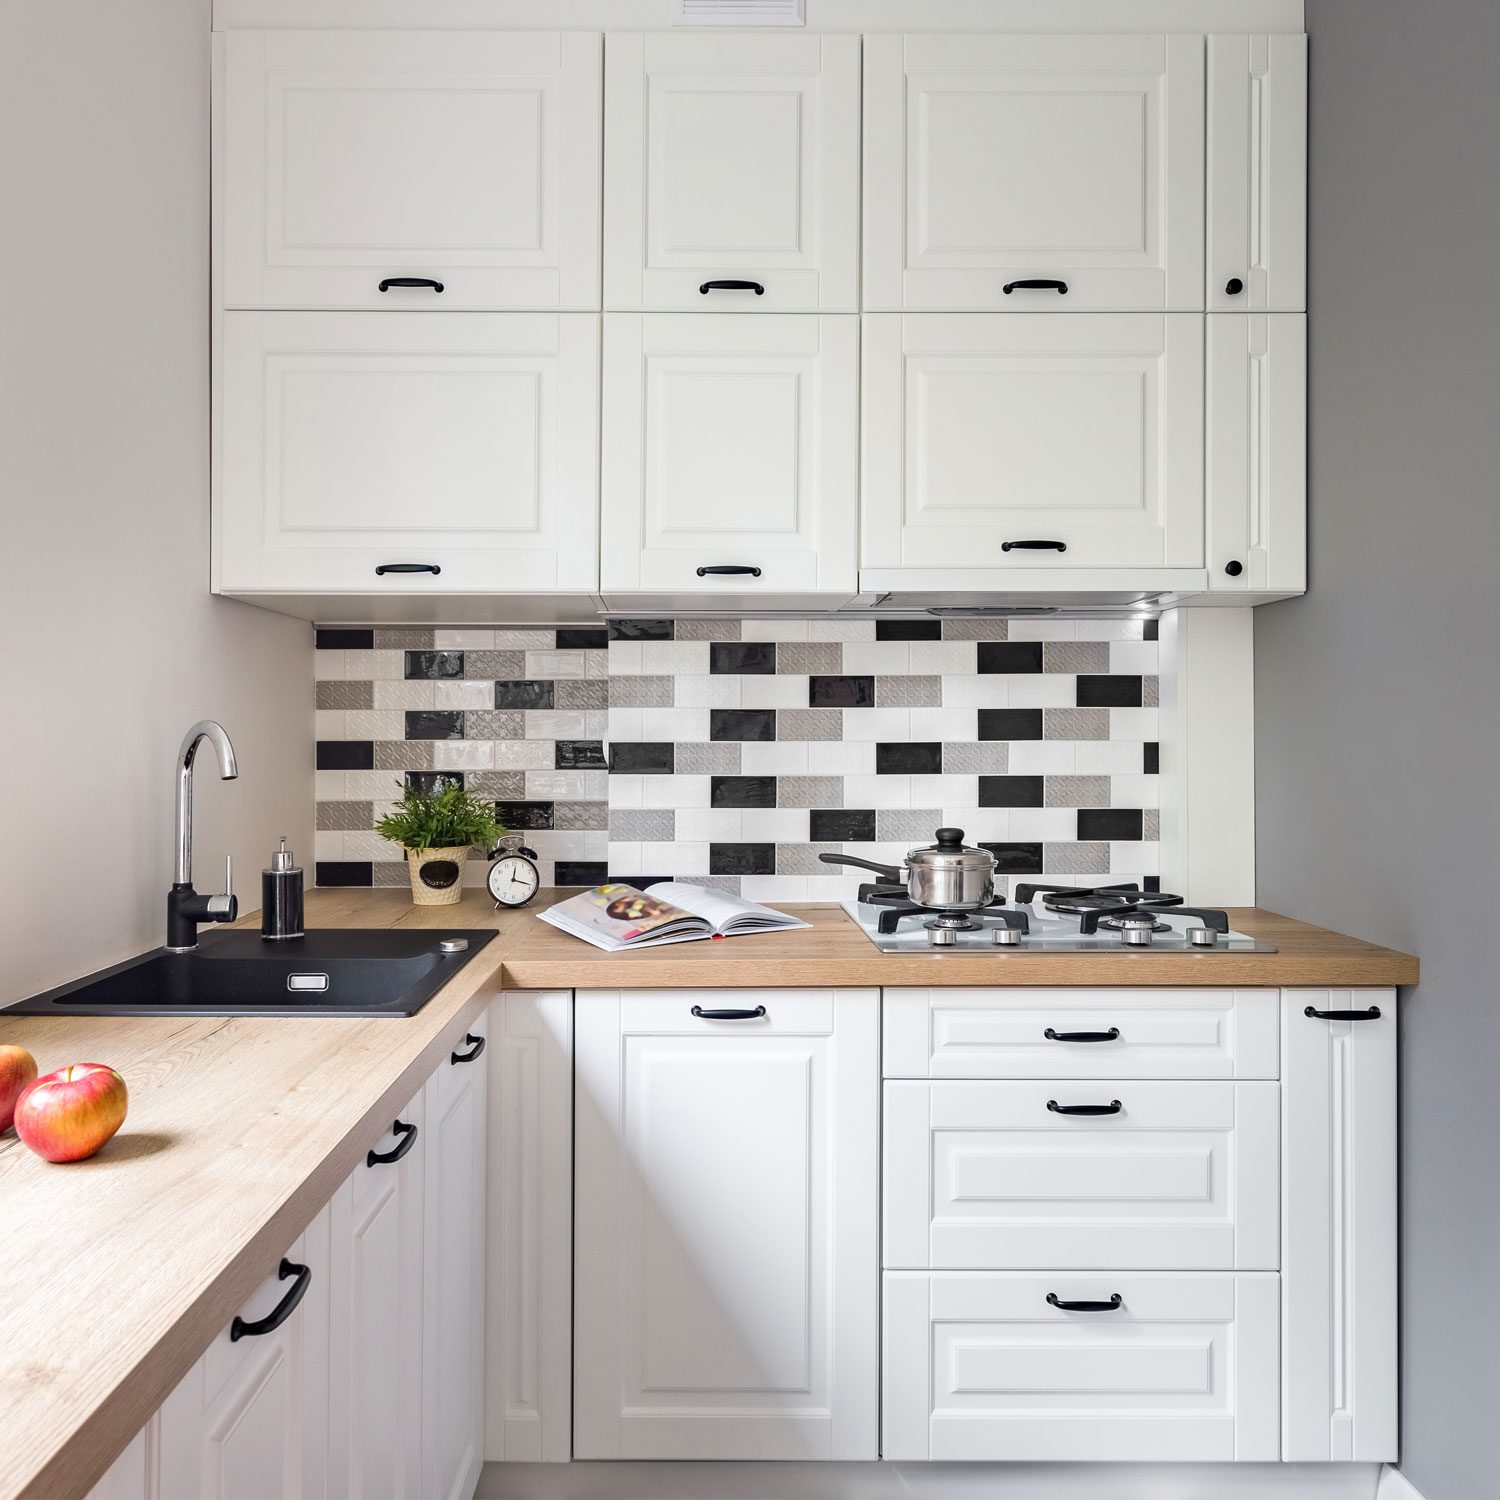 24 Small-Kitchen Storage Ideas to Help You Maximize Your Space